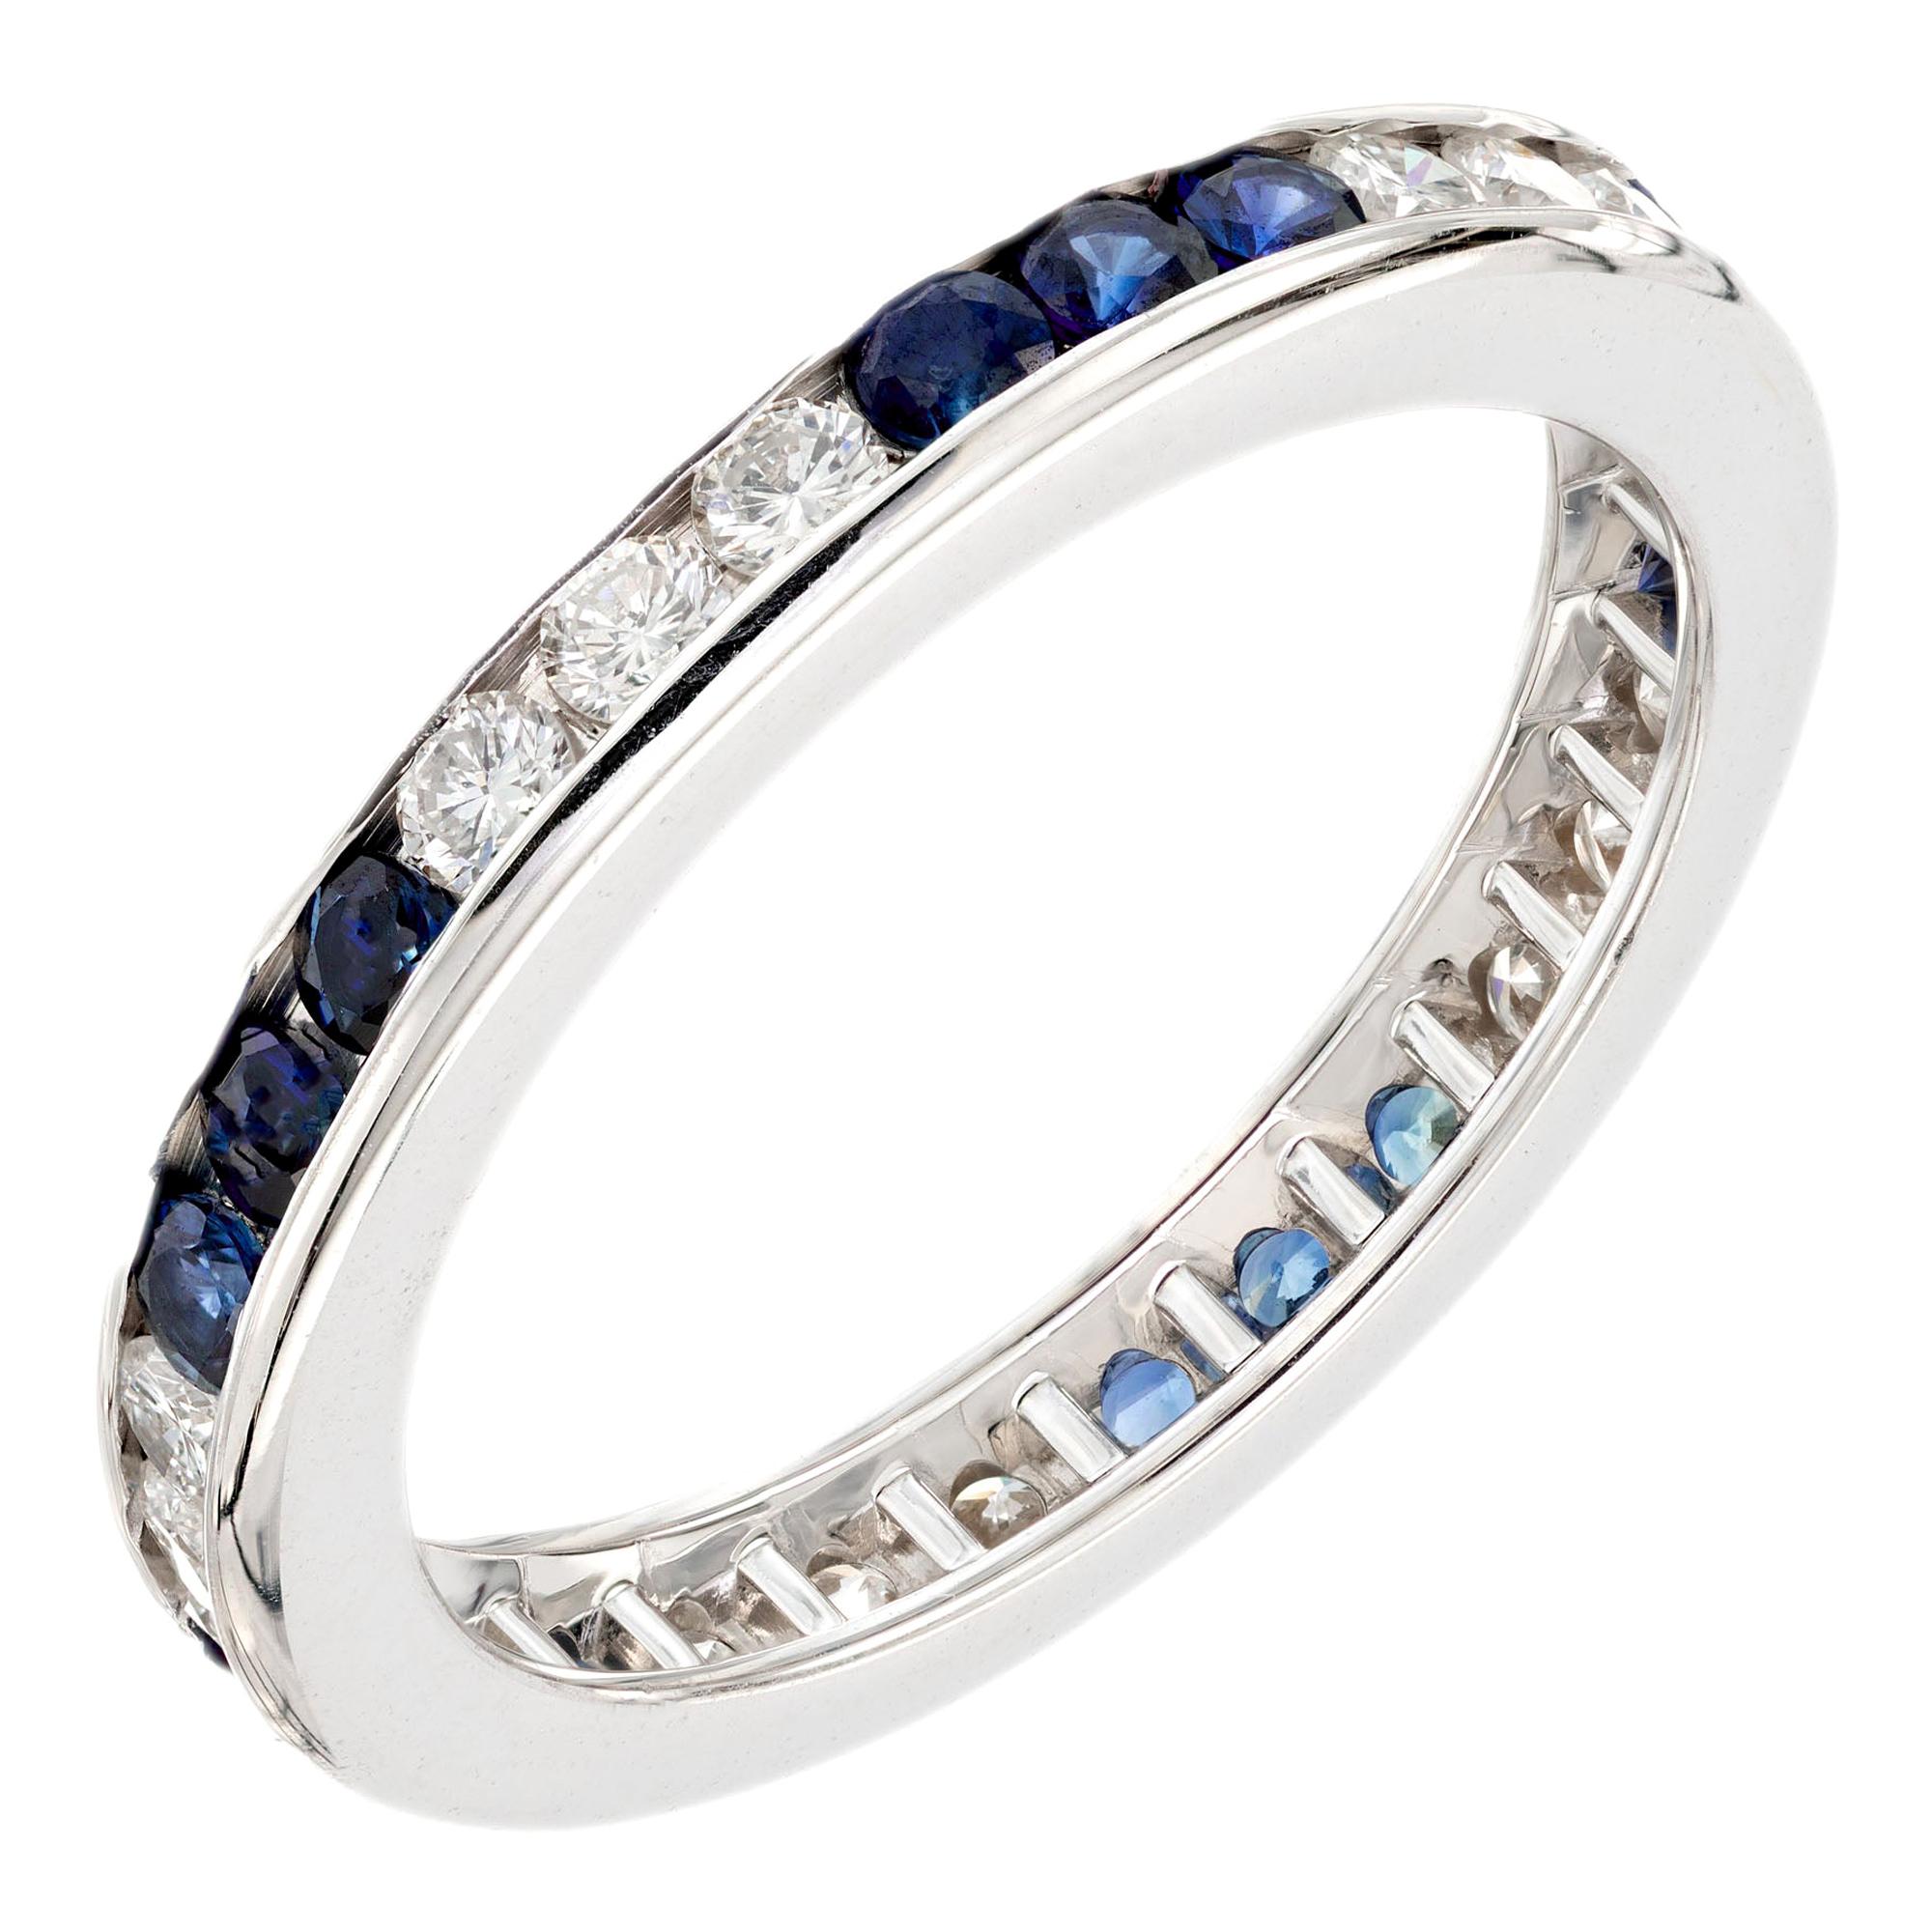 1.03 Carat Sapphire Diamond White Gold Wedding Band Ring For Sale